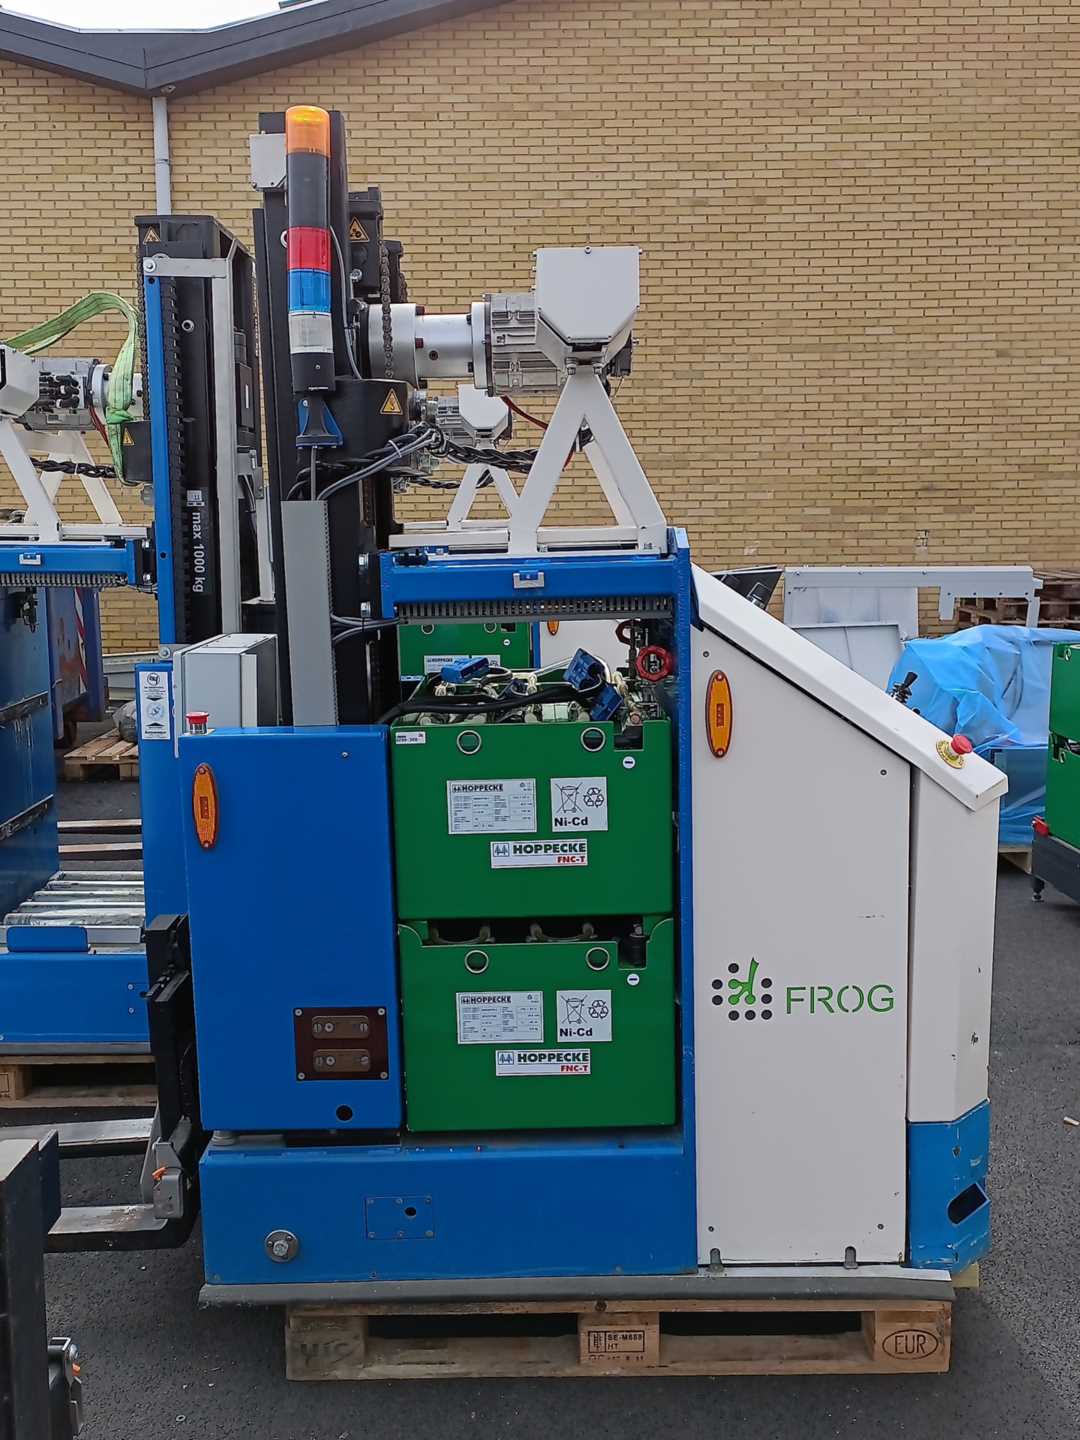 Frog AGV Systems MMH 1T M CFL Automated Guided Vehicle